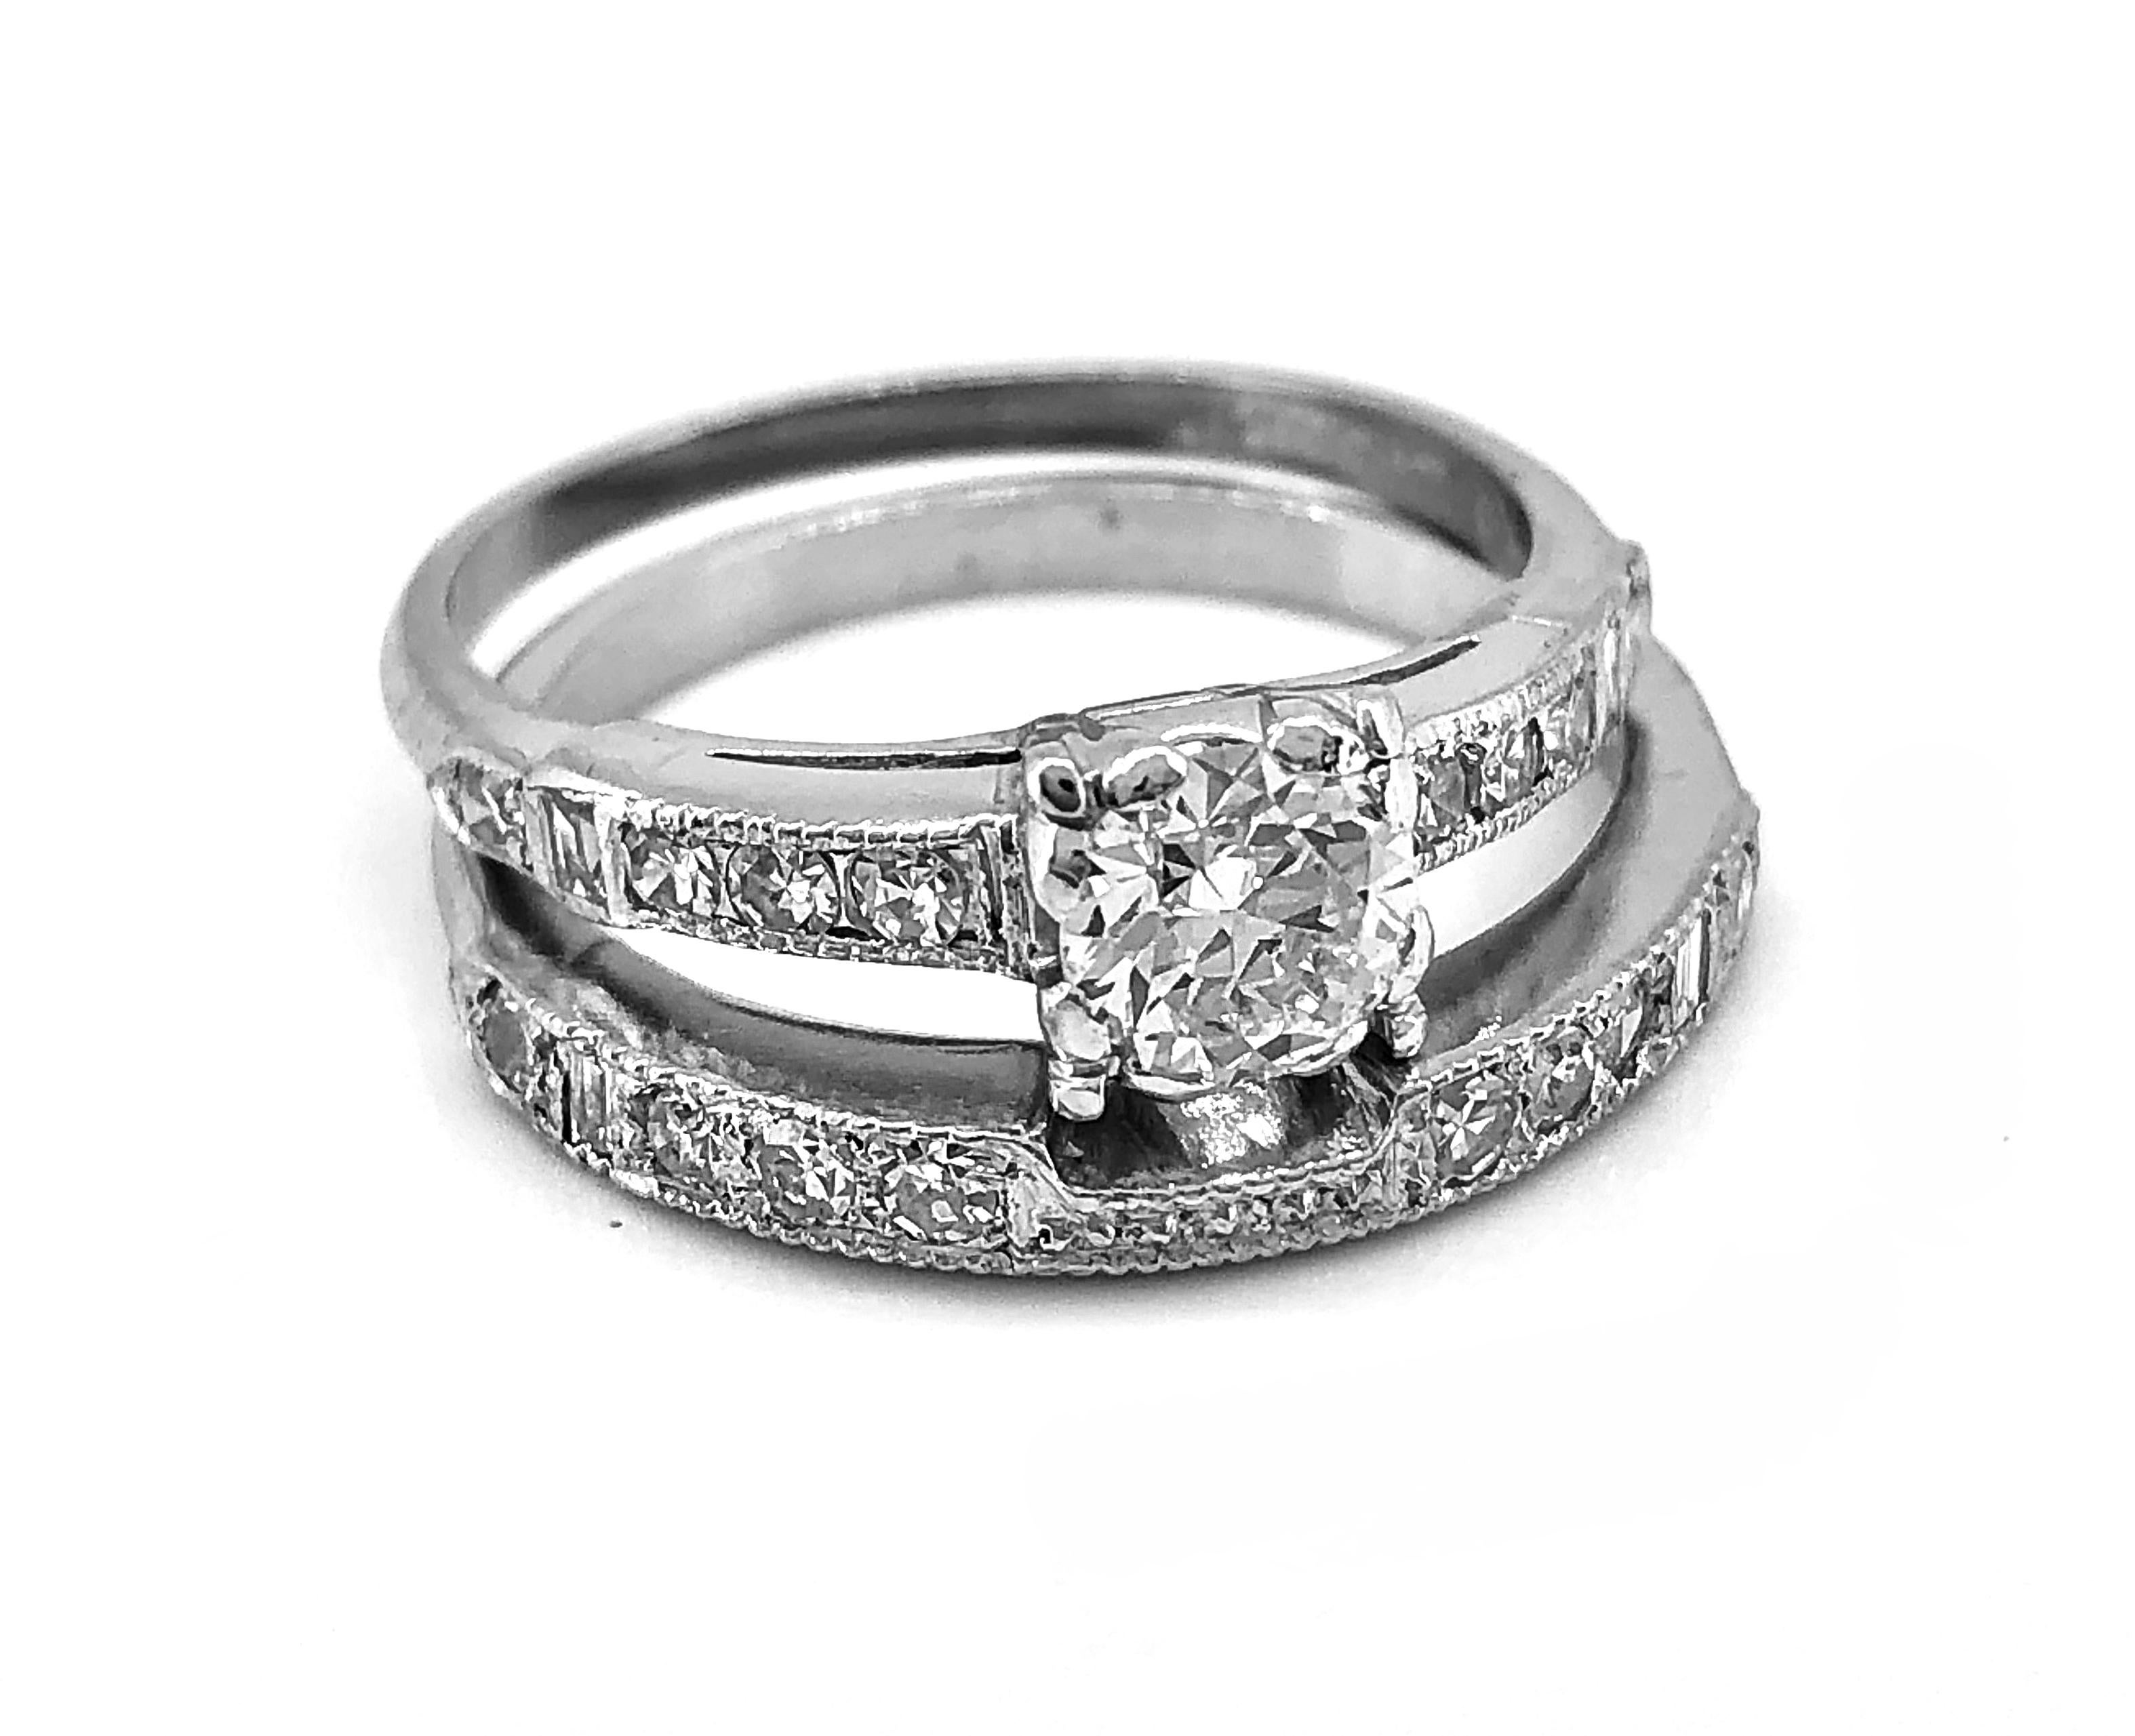 An ultra feminine Art Deco diamond Antique engagement ring/wedding set, crafted in platinum, featuring a .50ct. apx. European cut diamond with VS2 clarity and G color. Accenting the center stone on the shoulders of the ring and on the band are